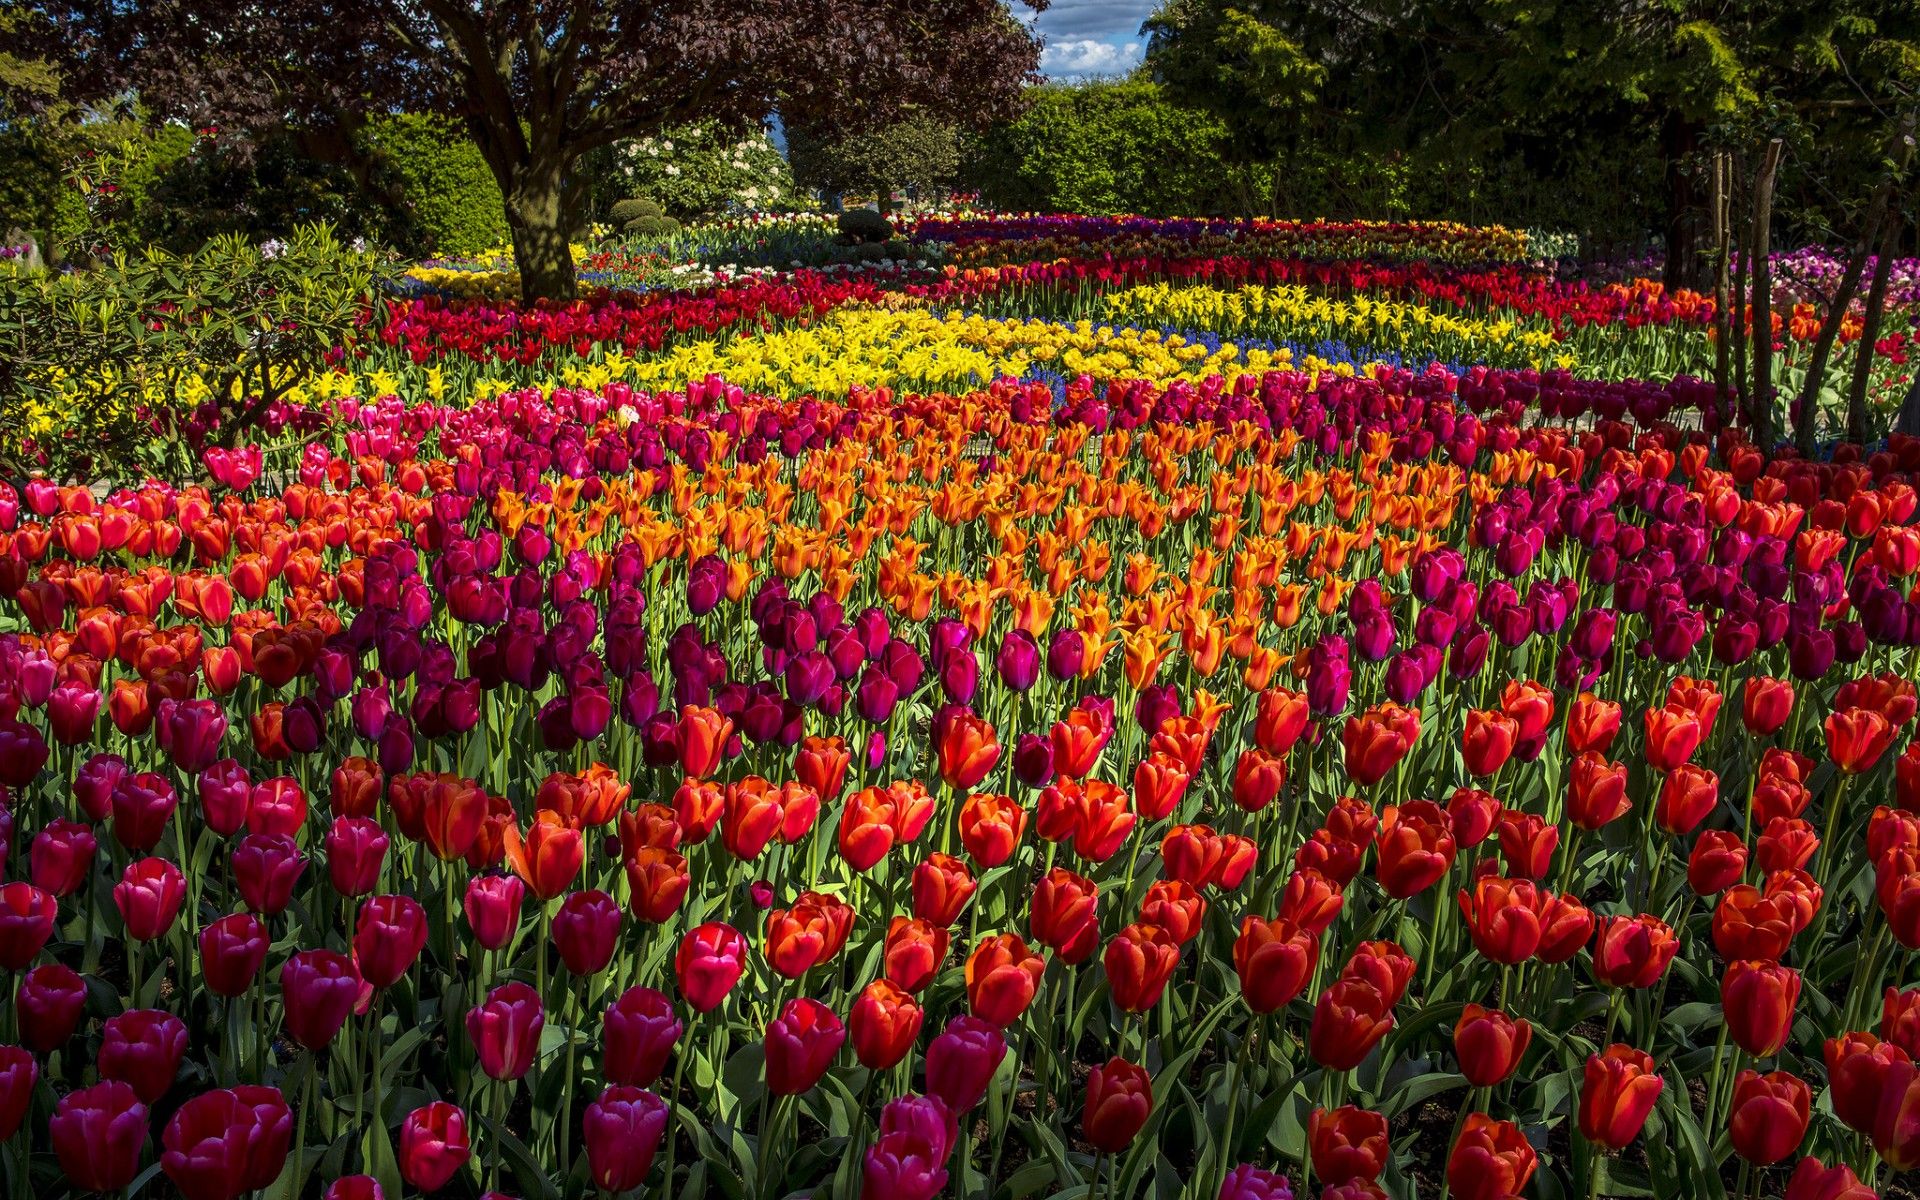 Earth Flower Tulip Park Tree Colorful Netherlands Spring Wallpaper:1920x1200